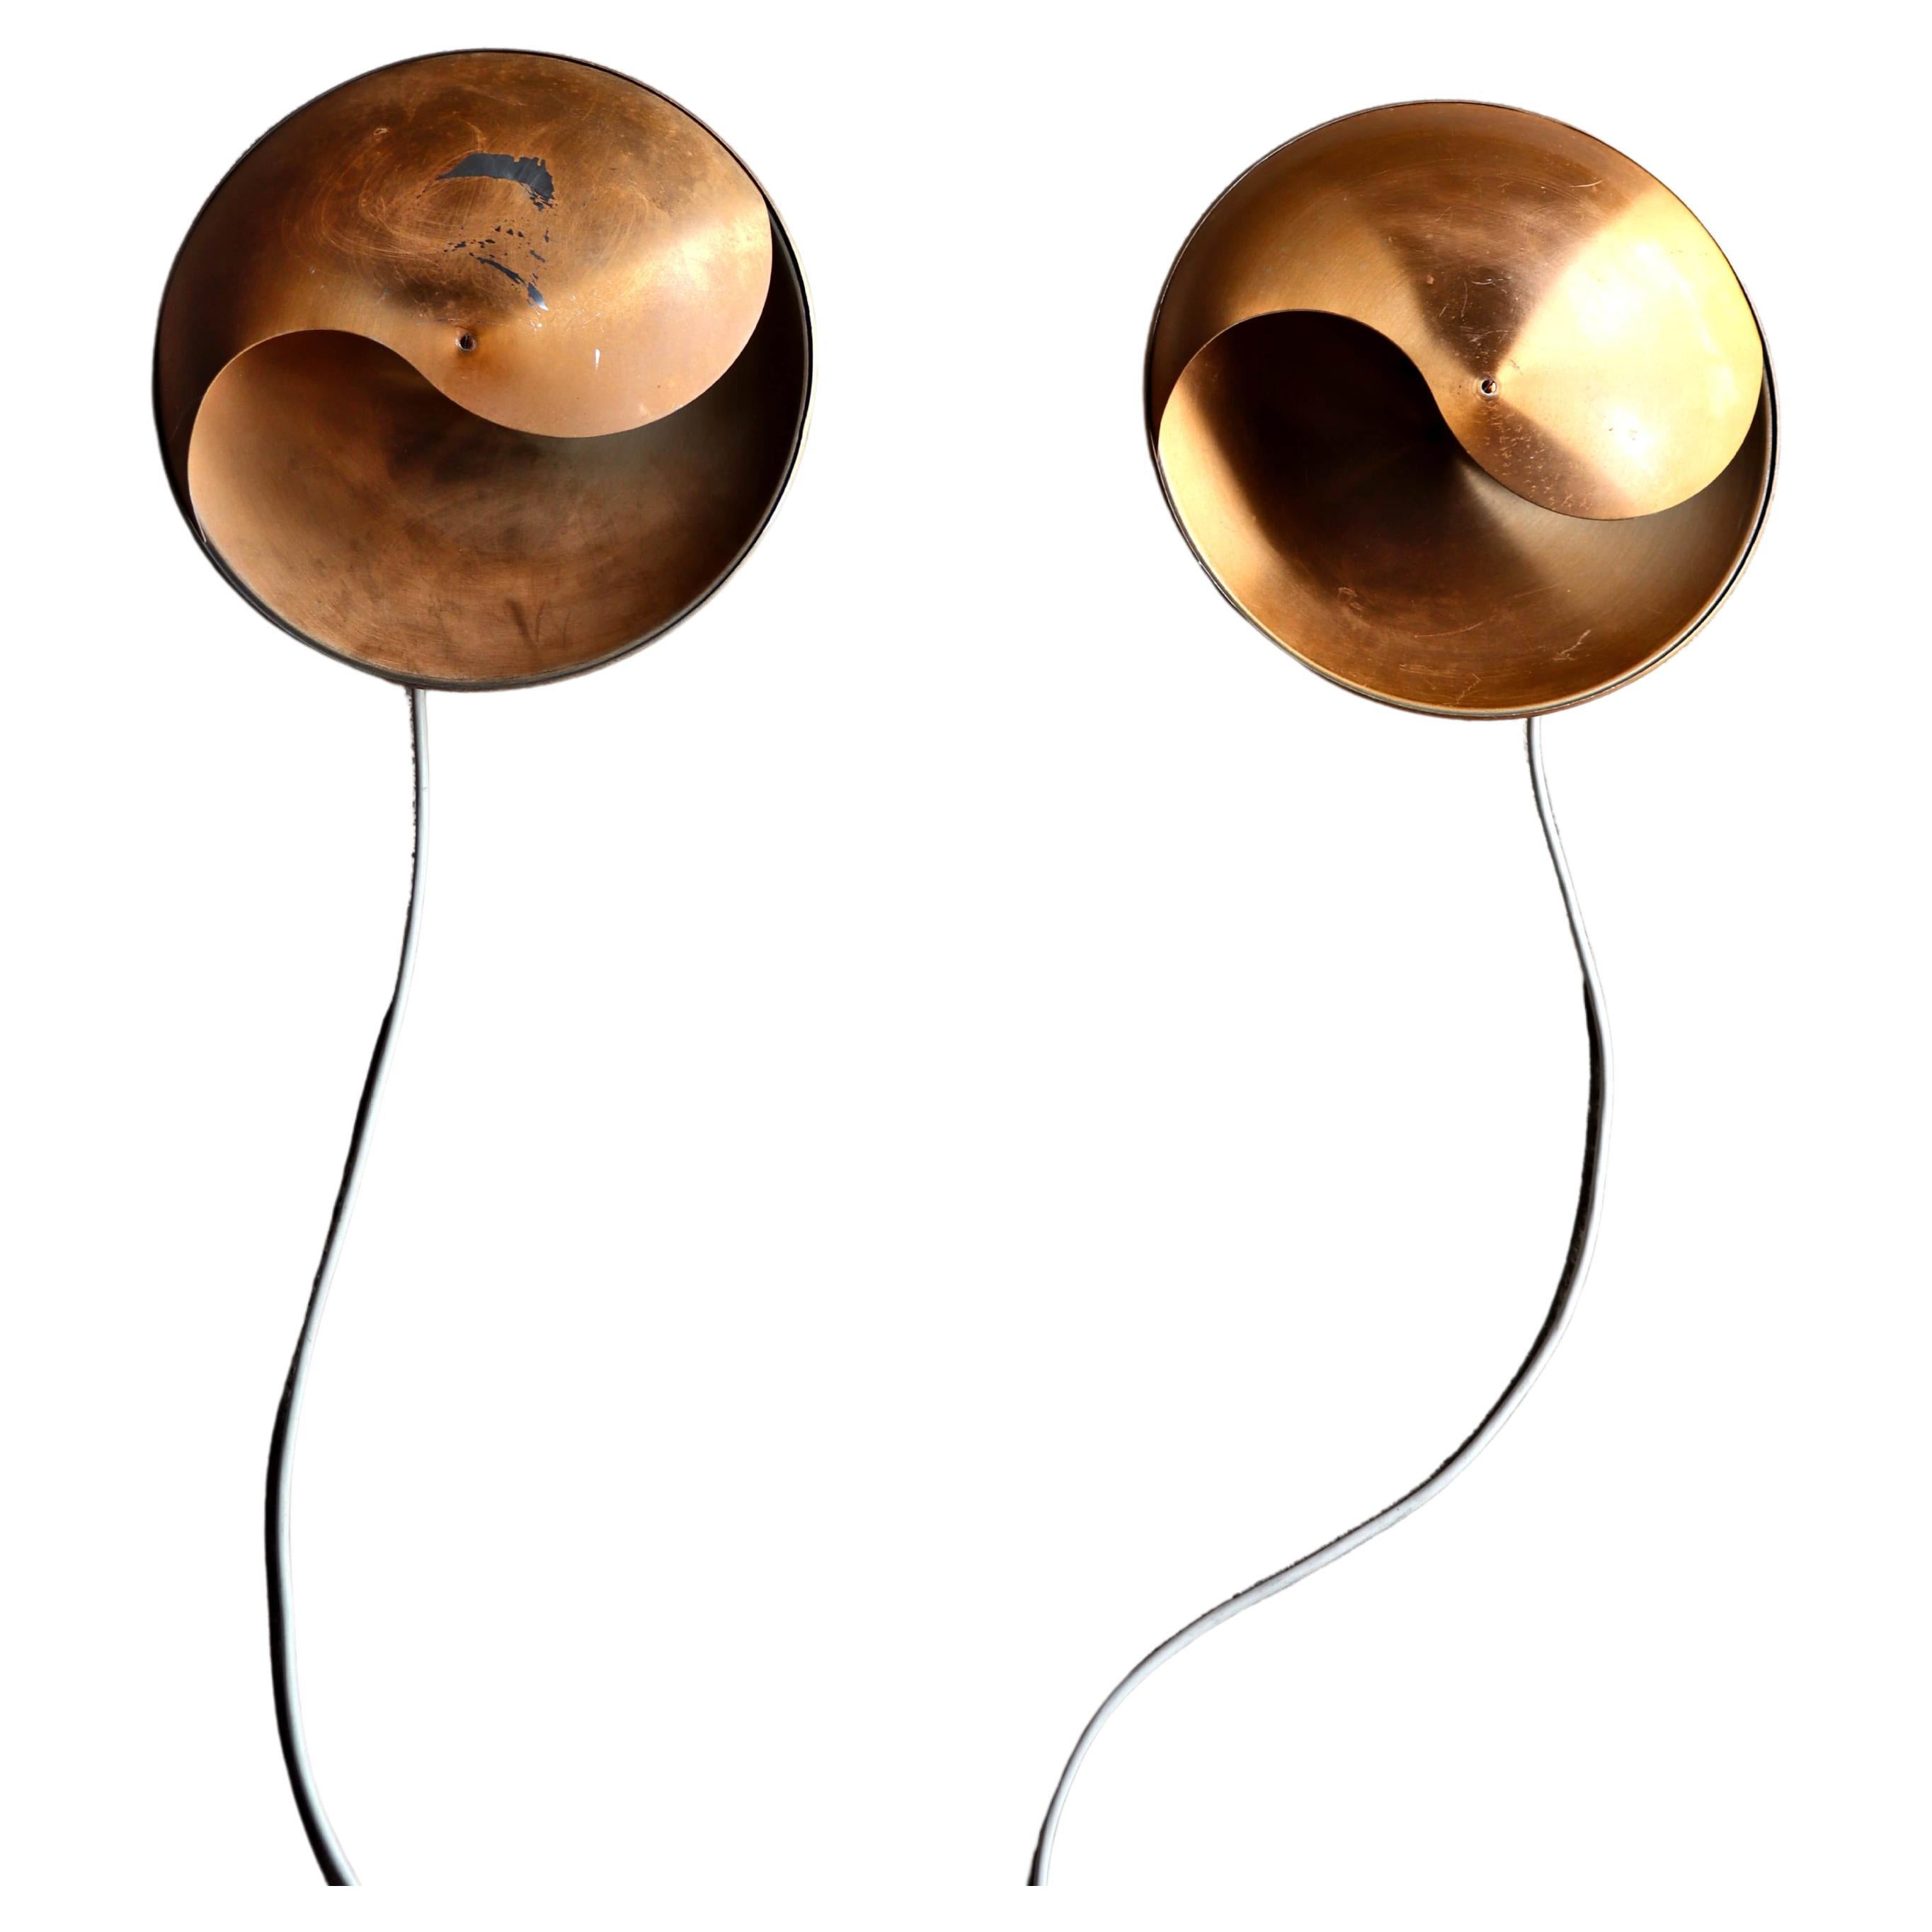 These cool wall lamps are called Yin Yang and are designed by Hermian Snijder de Vogel and produced by the Raak Amsterdam in the 1960s. 1 wall lamp is in good condition, the other one unfortunately has marks of usage and wrongful cleaning.